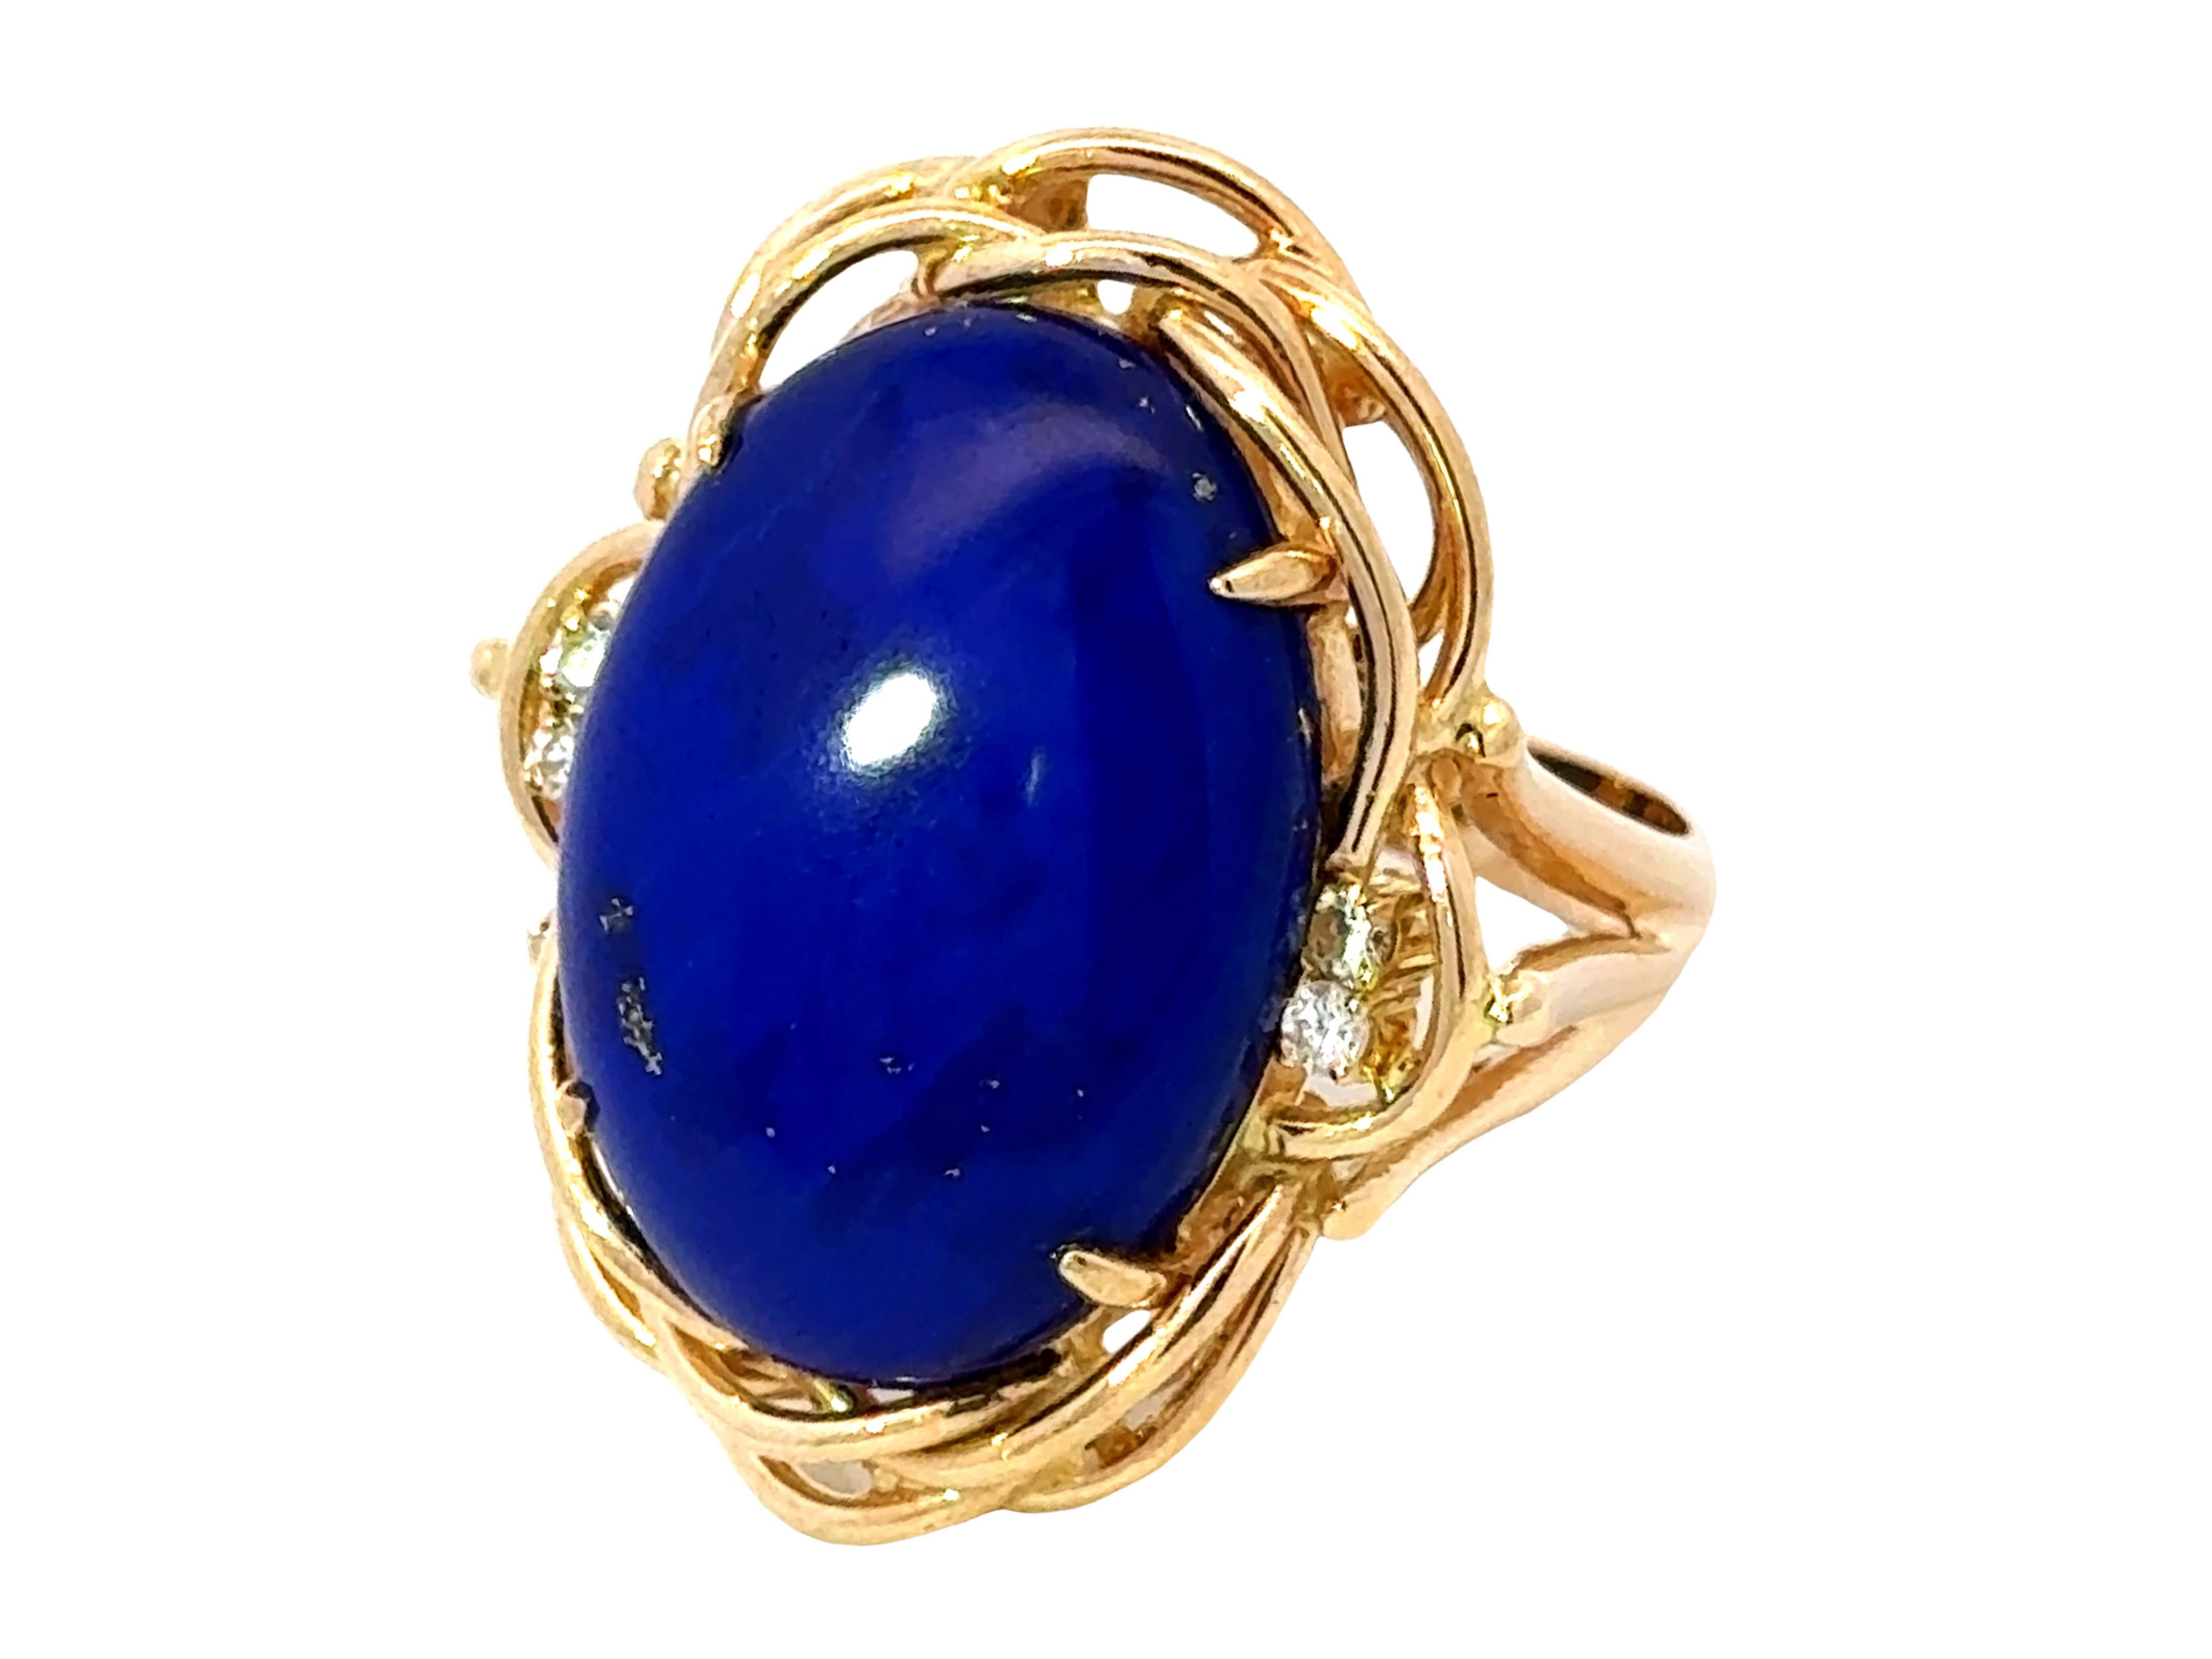 Oval Cut Large Oval Lapis Lazuli Diamond Cocktail Ring 14k Yellow Gold For Sale